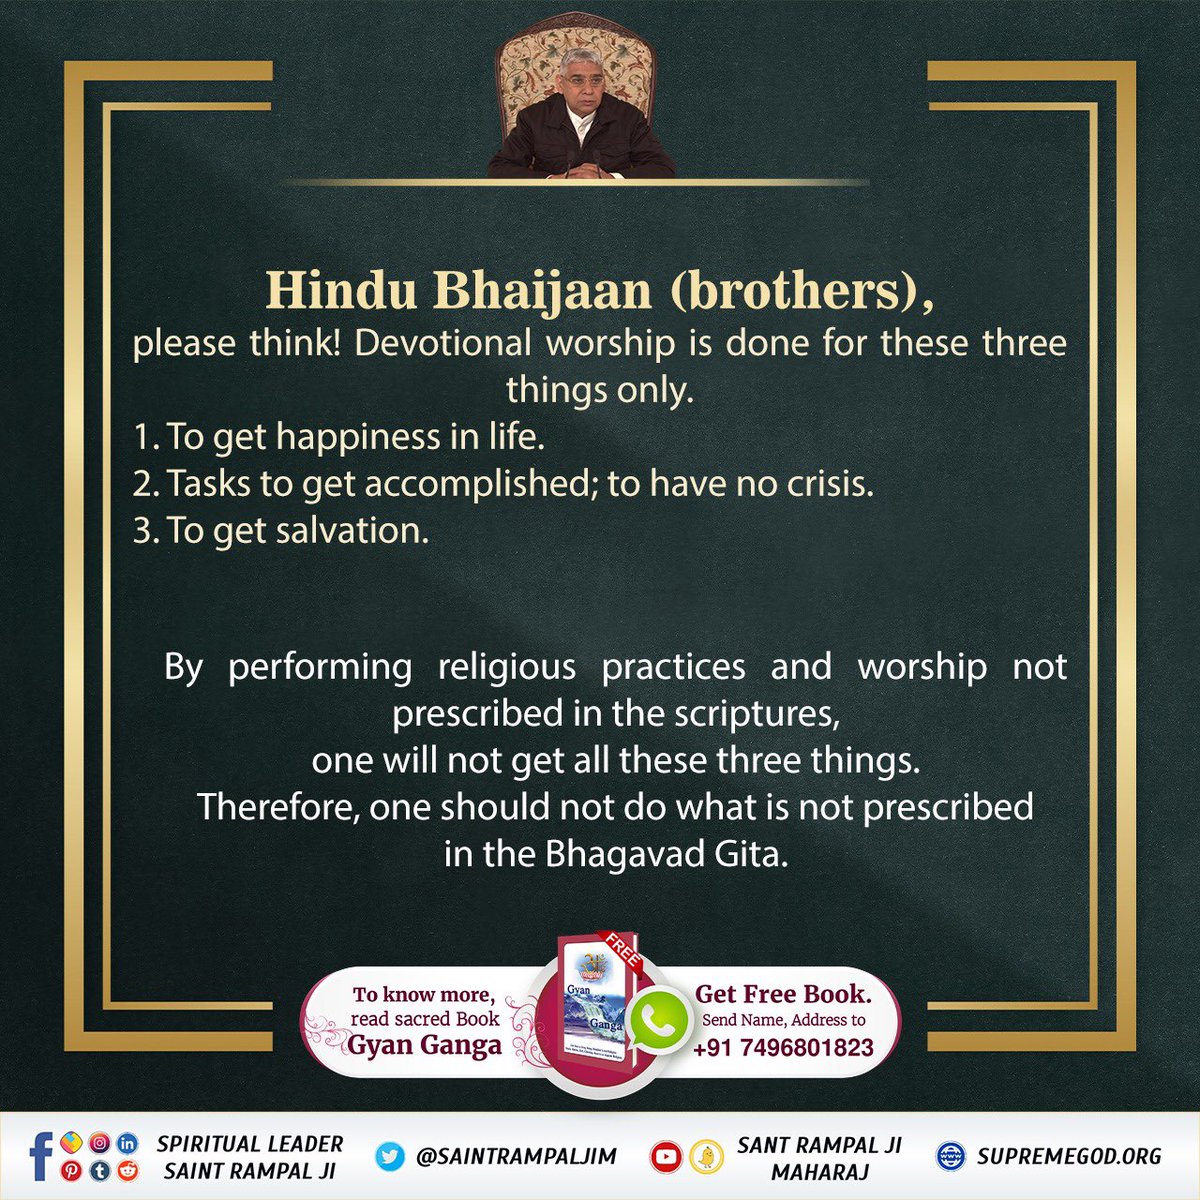 #GodMorningSatursday
please think! Devotional worship is done for these three things only.
1. To get happiness in life.
2. Tasks to get accomplished; to have no crisis.
3. To get salvation.
By performing religious practices and worship not prescribed in the scriptures.